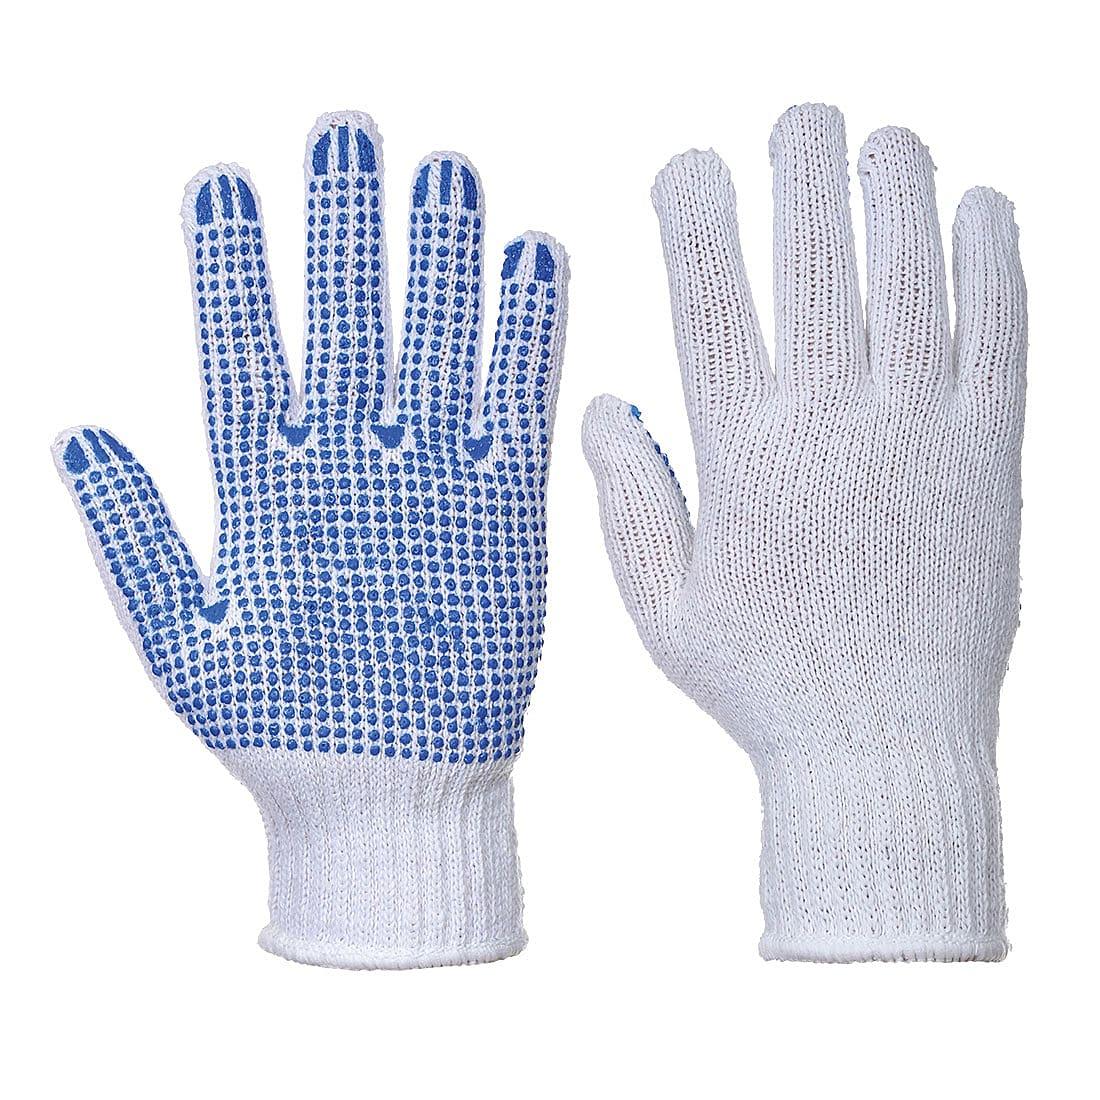 Portwest Classic Polka Dot Gloves in White / Blue (Product Code: A111)